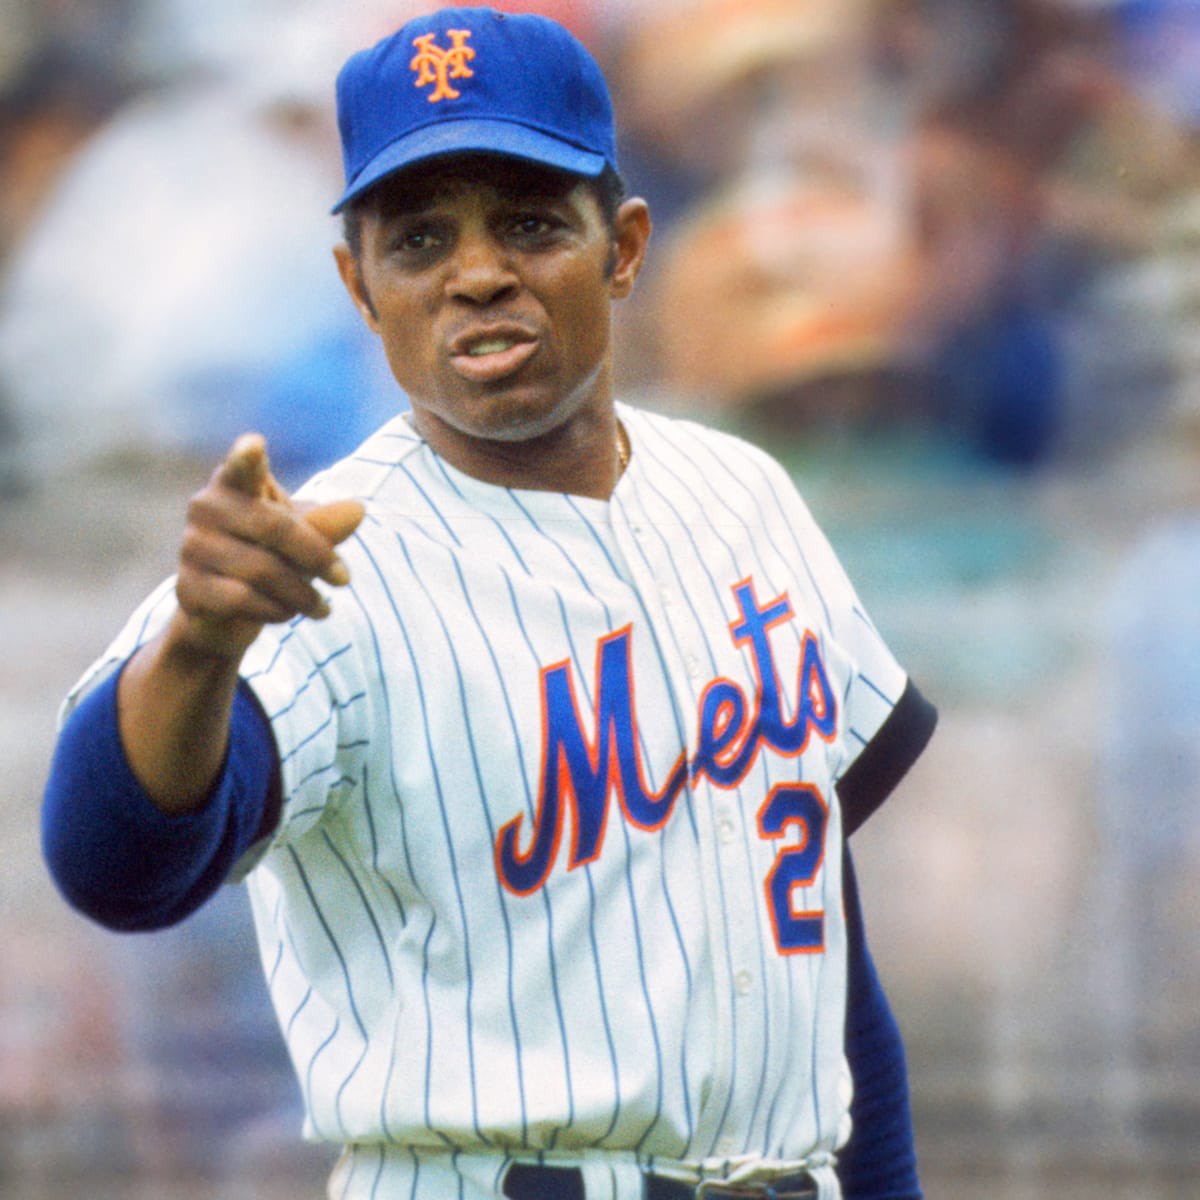 5/11/1972 Willie Mays comes back to New York when the Mets acquire him in a trade with the Giants.